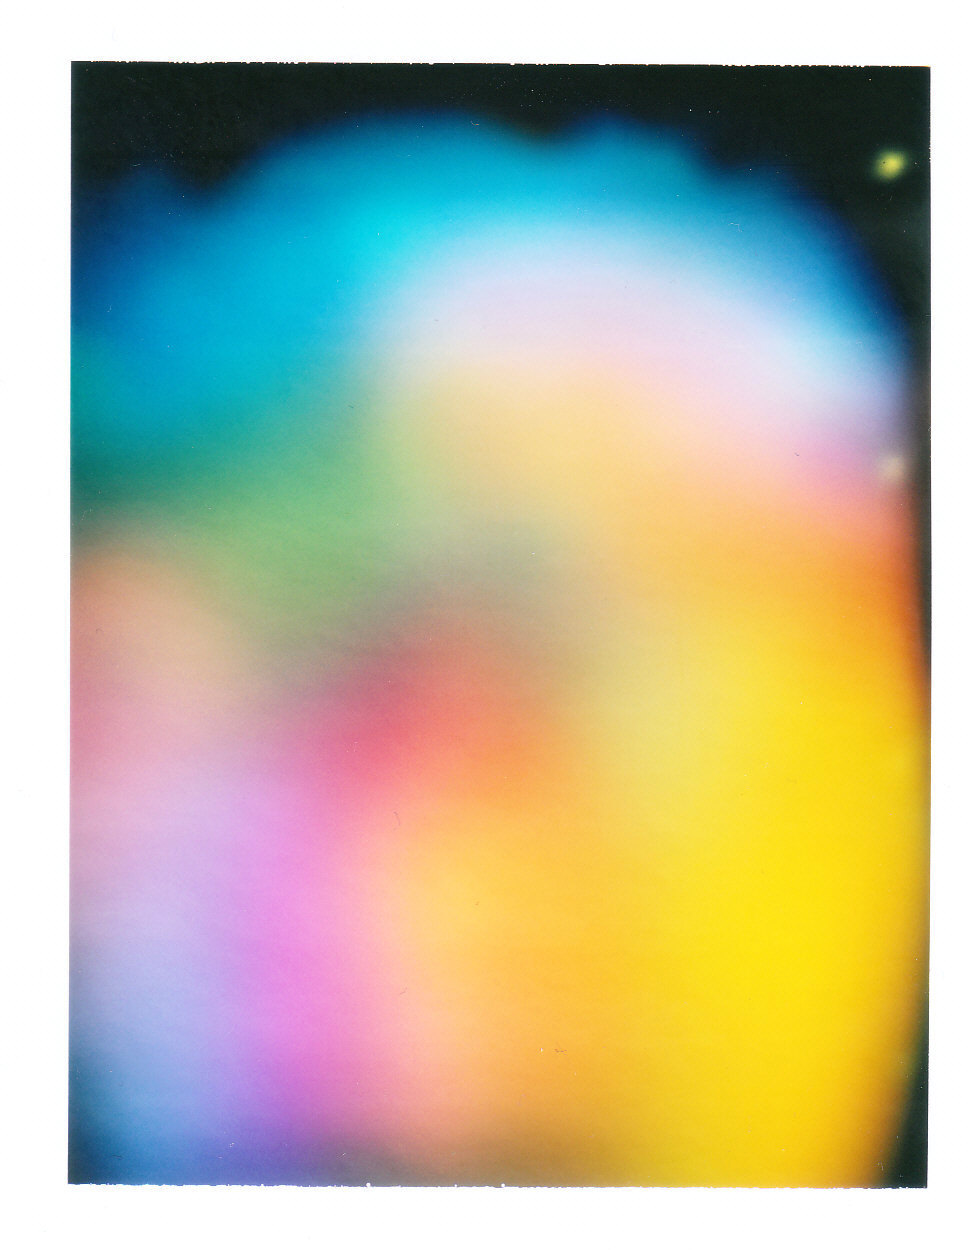 Got a new aura photo taken today (and my scanner working!)
Reader says he very rarely sees so many colors in one photo. Apparently this is what happens when you integrate planetary energy into your aura via ceremonial magick.
I plan on getting...